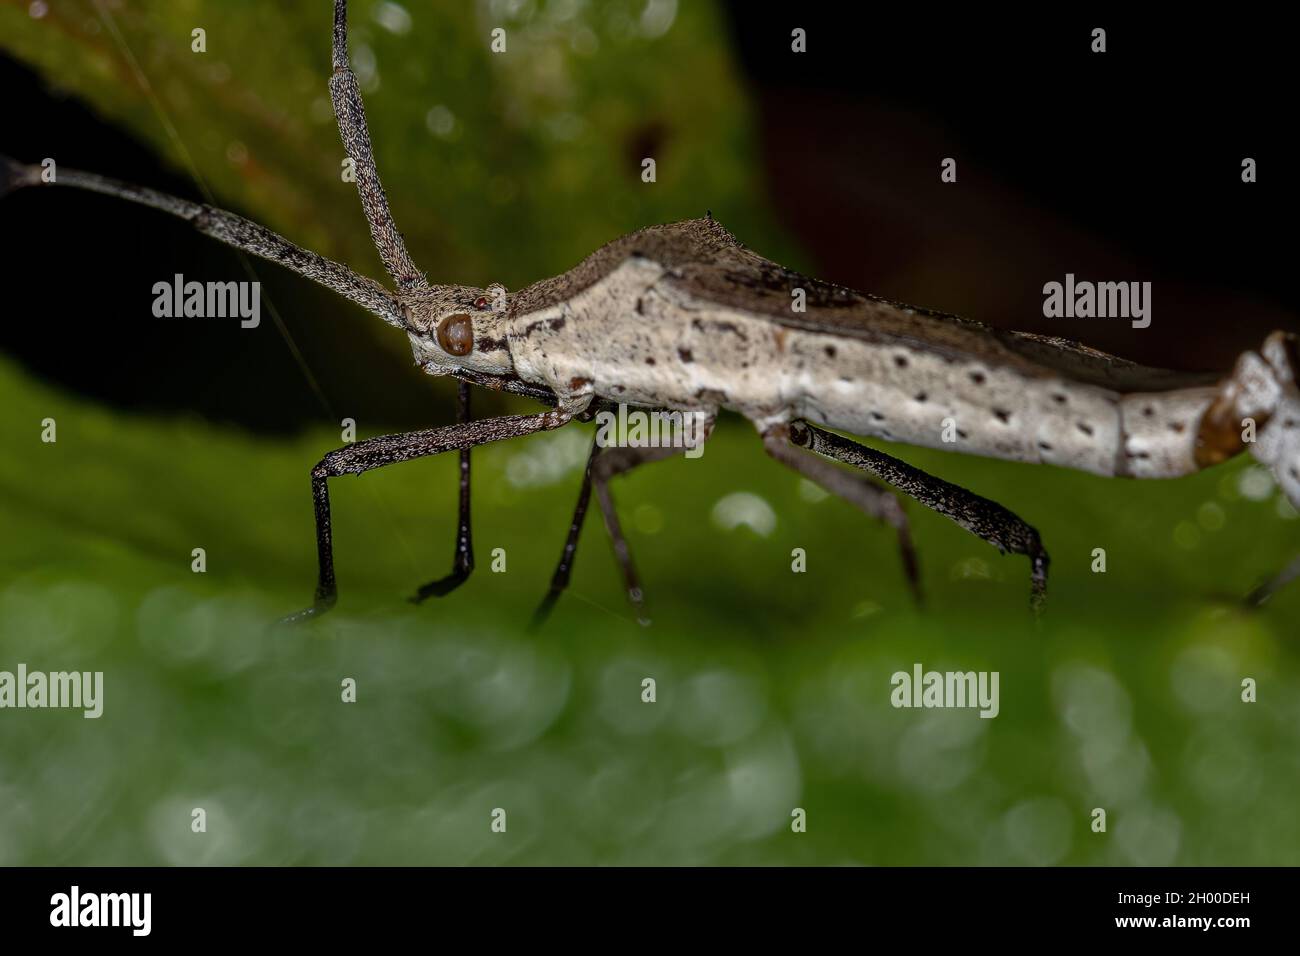 Adult Leaf-footed Bugs of the genus Chariesterus coupling Stock Photo